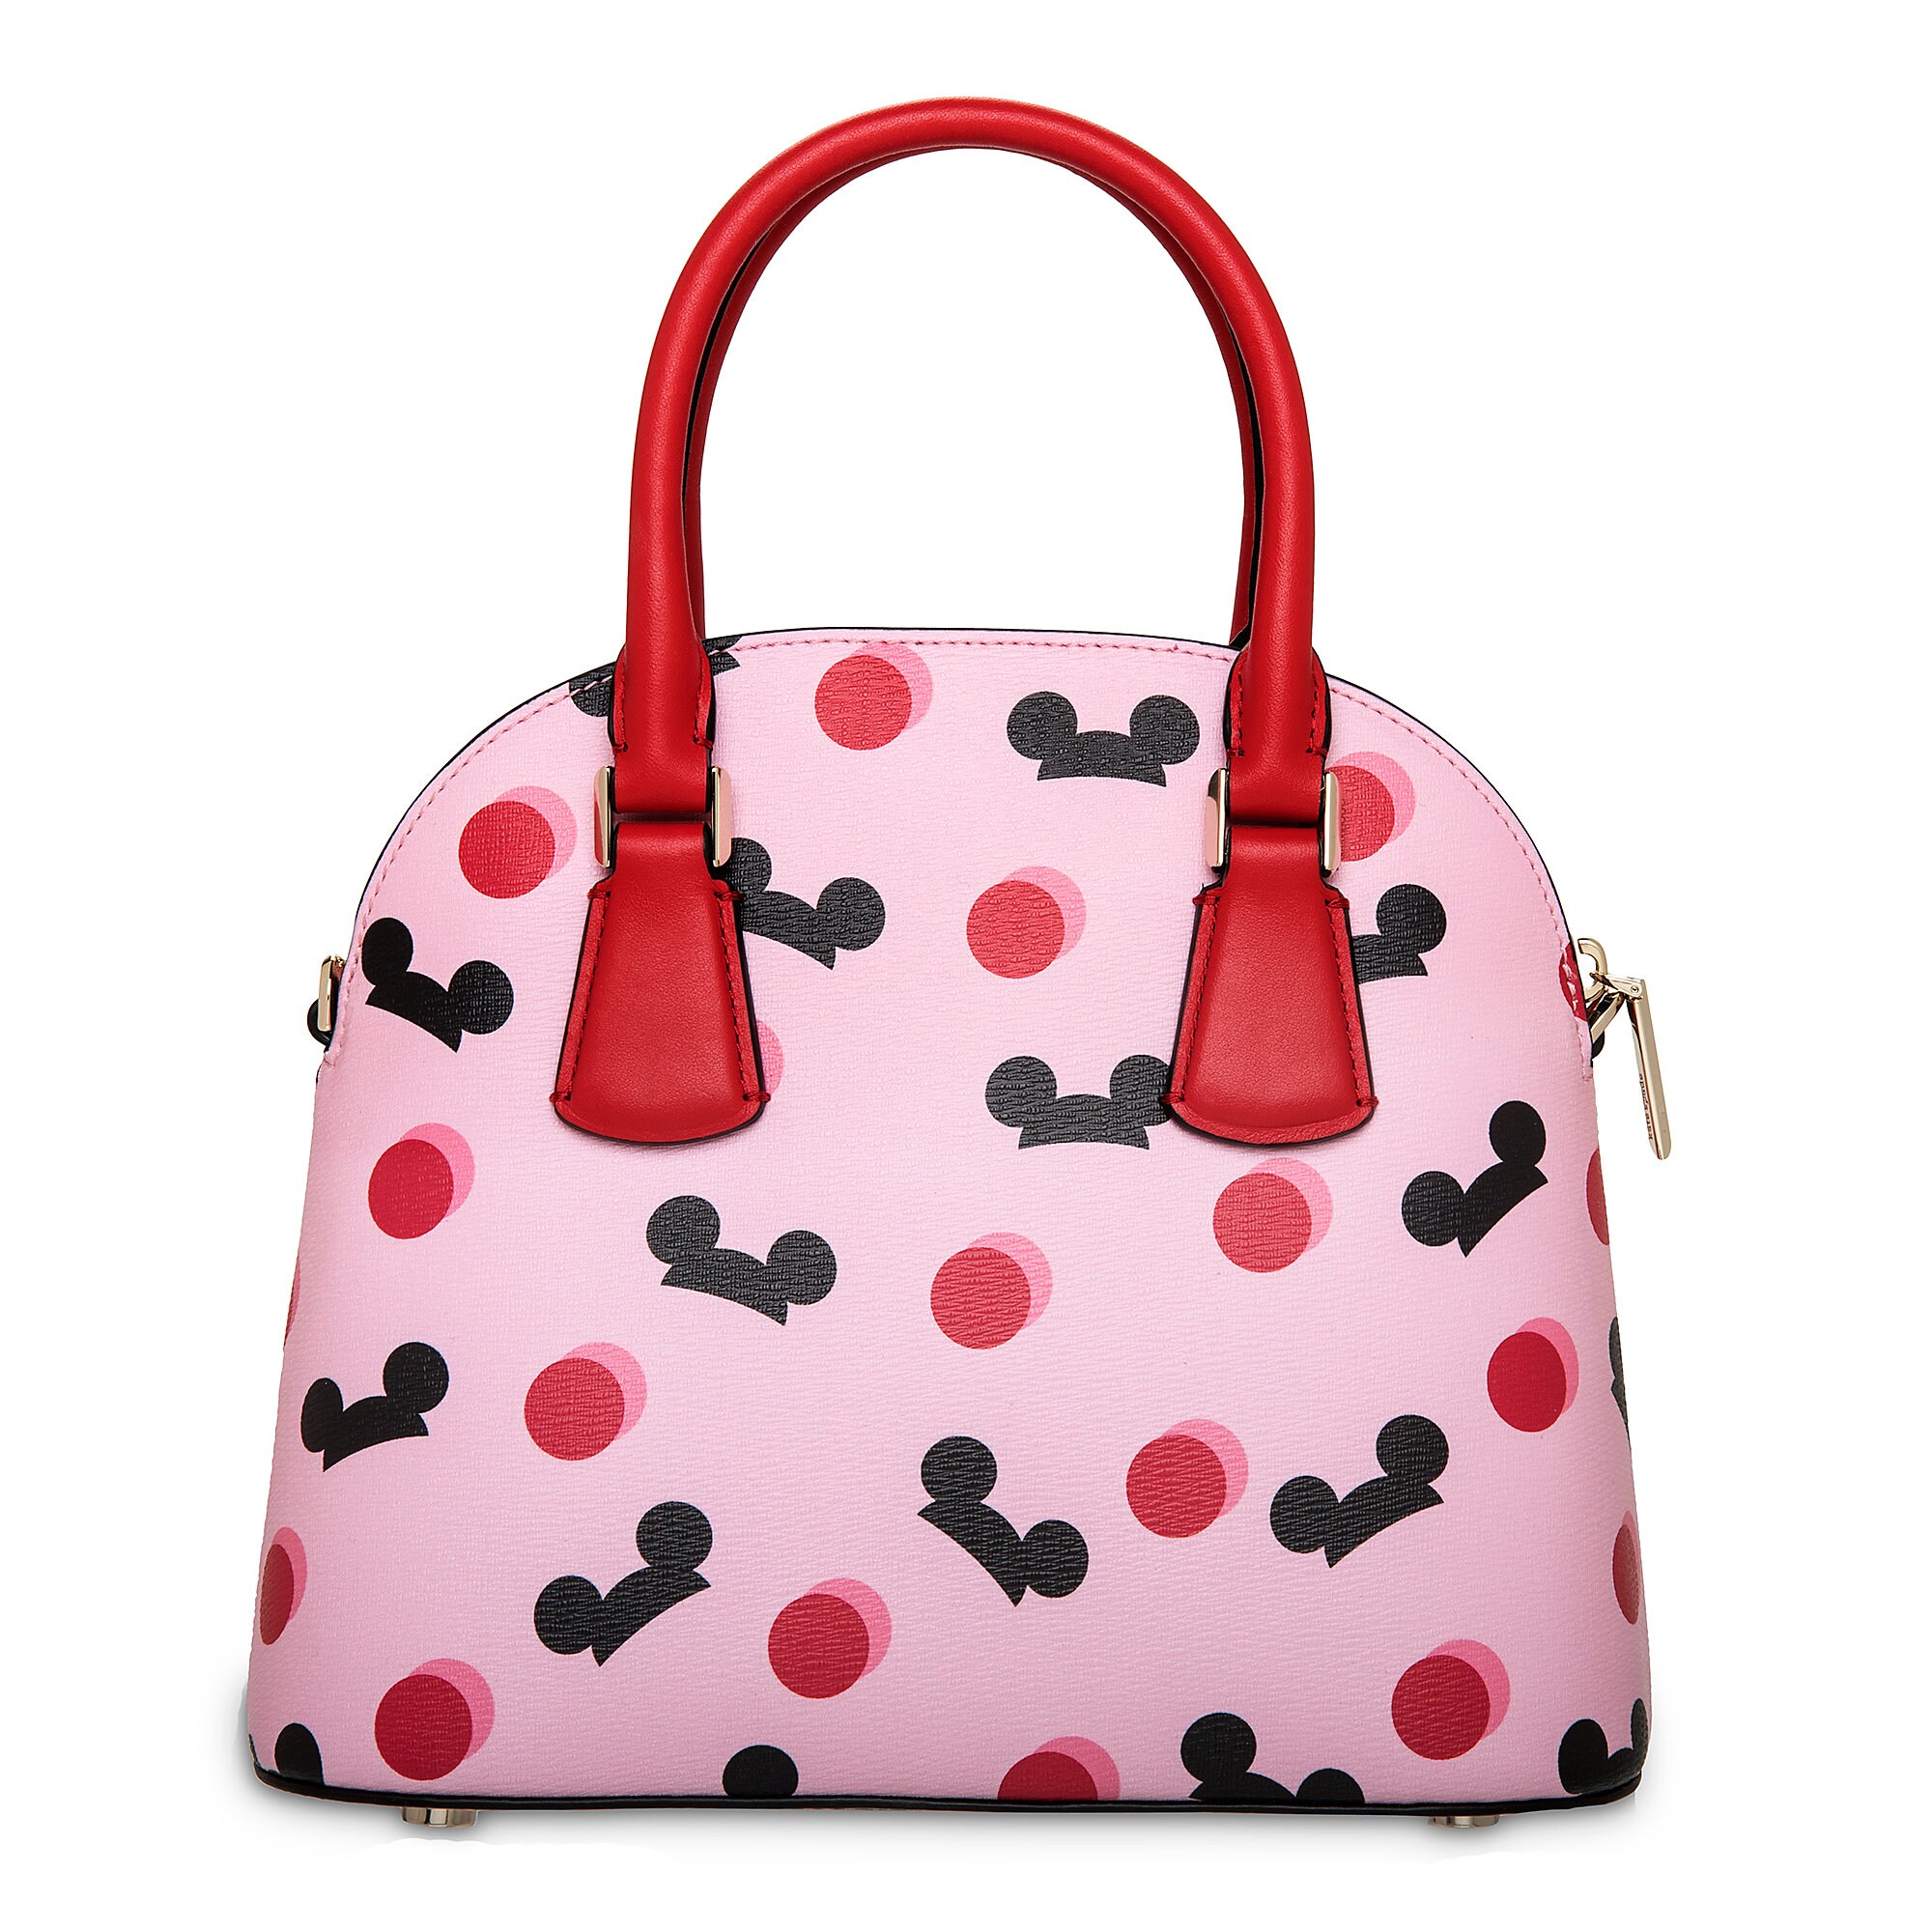 Mickey Mouse Ear Hat Satchel by kate spade new york - Small - Pink here ...